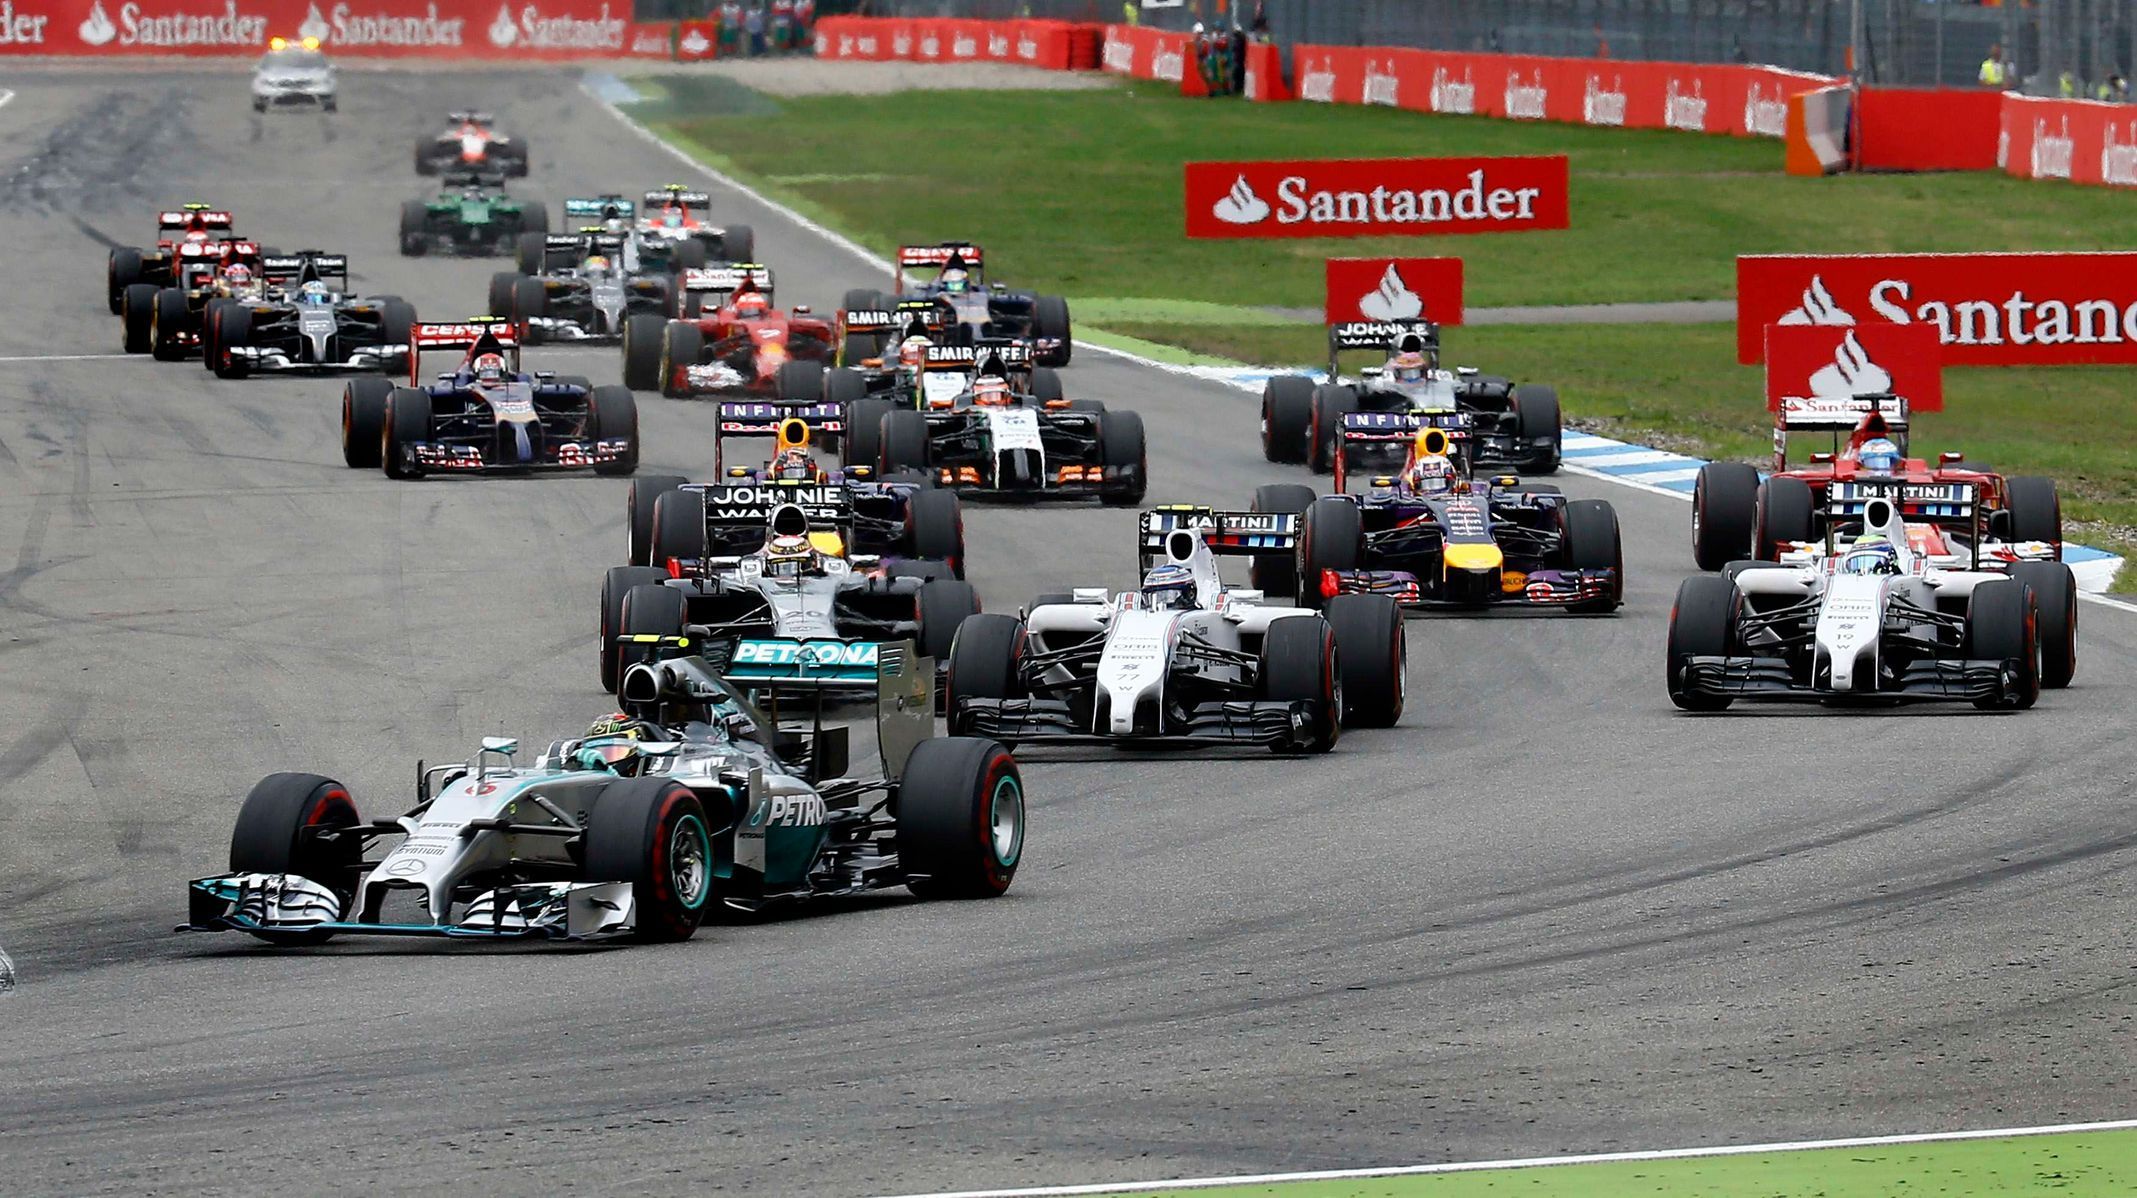 Mercedes Formula One driver Rosberg leads the race in the first corner after the start of the German F1 Grand Prix at the Hockenheim racing circuit